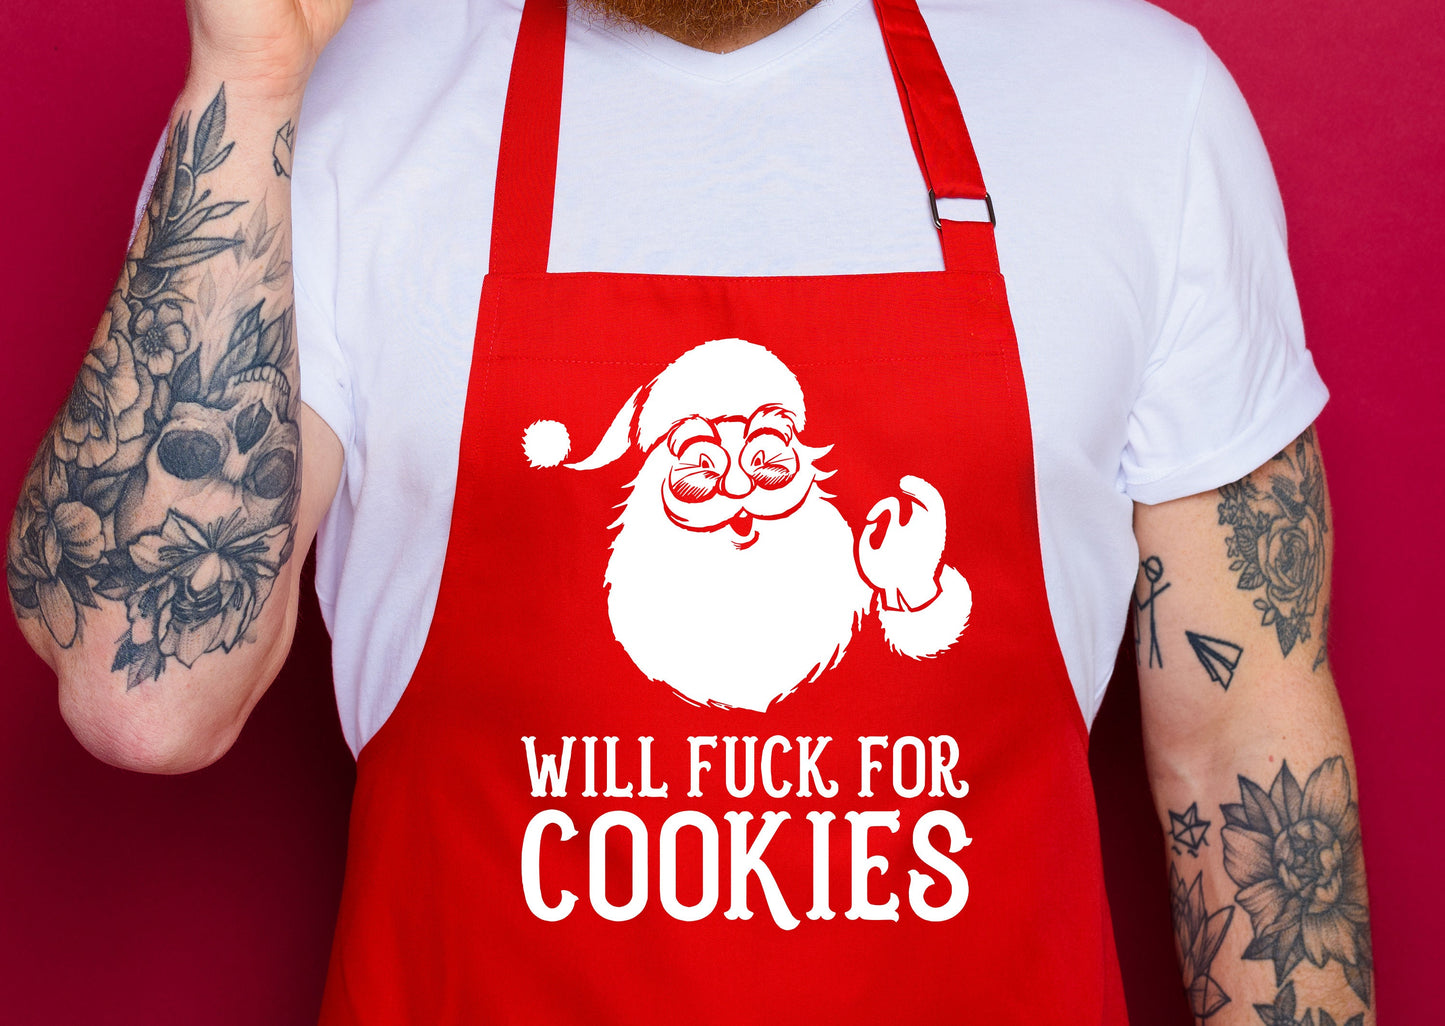 Will F**k For Cookies Organic Cotton Apron PR102 Rude Funny Christmas Dinner Apron